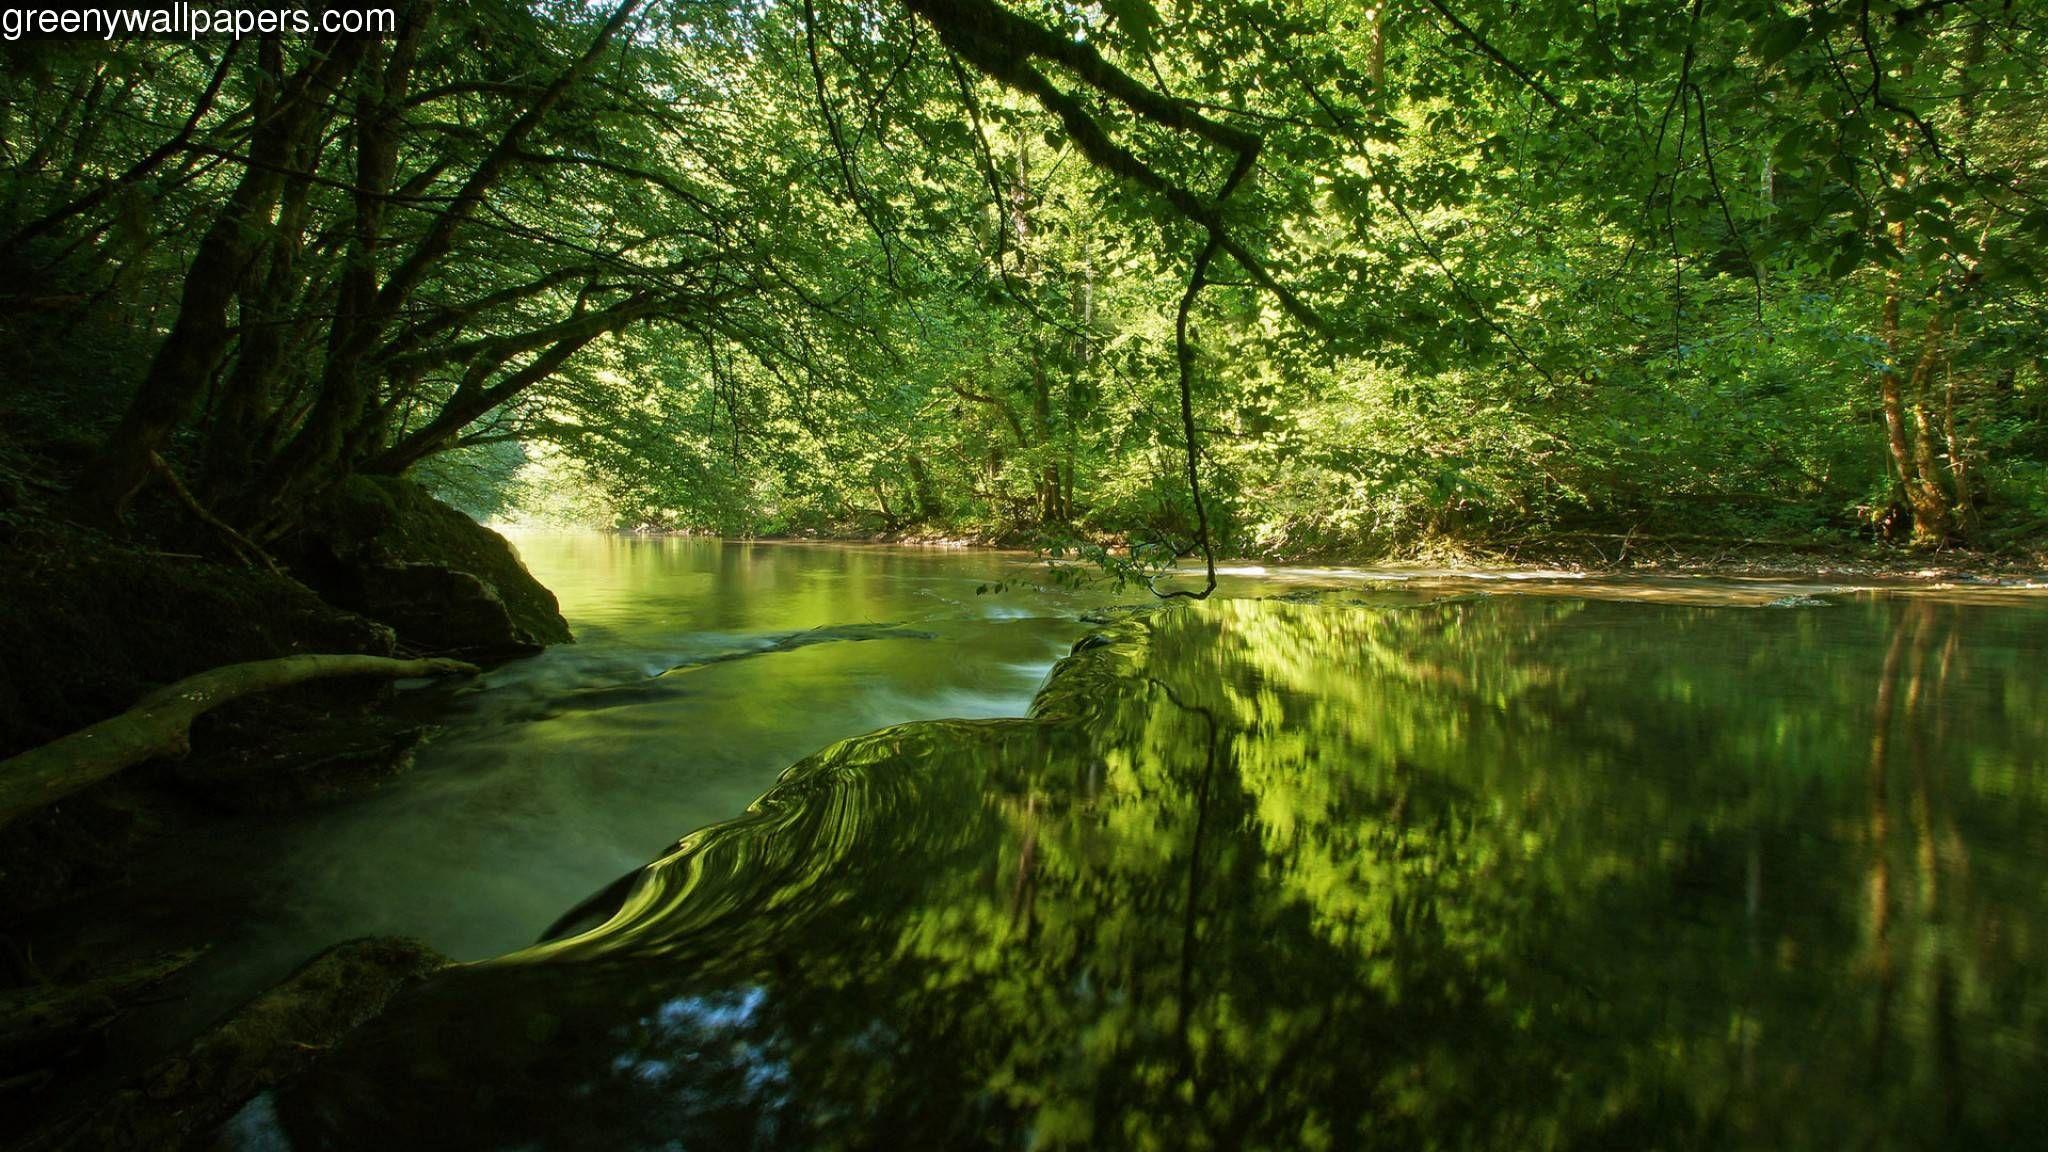 Forest River Wallpaper Phone #CMZ. Nature image, Woodland